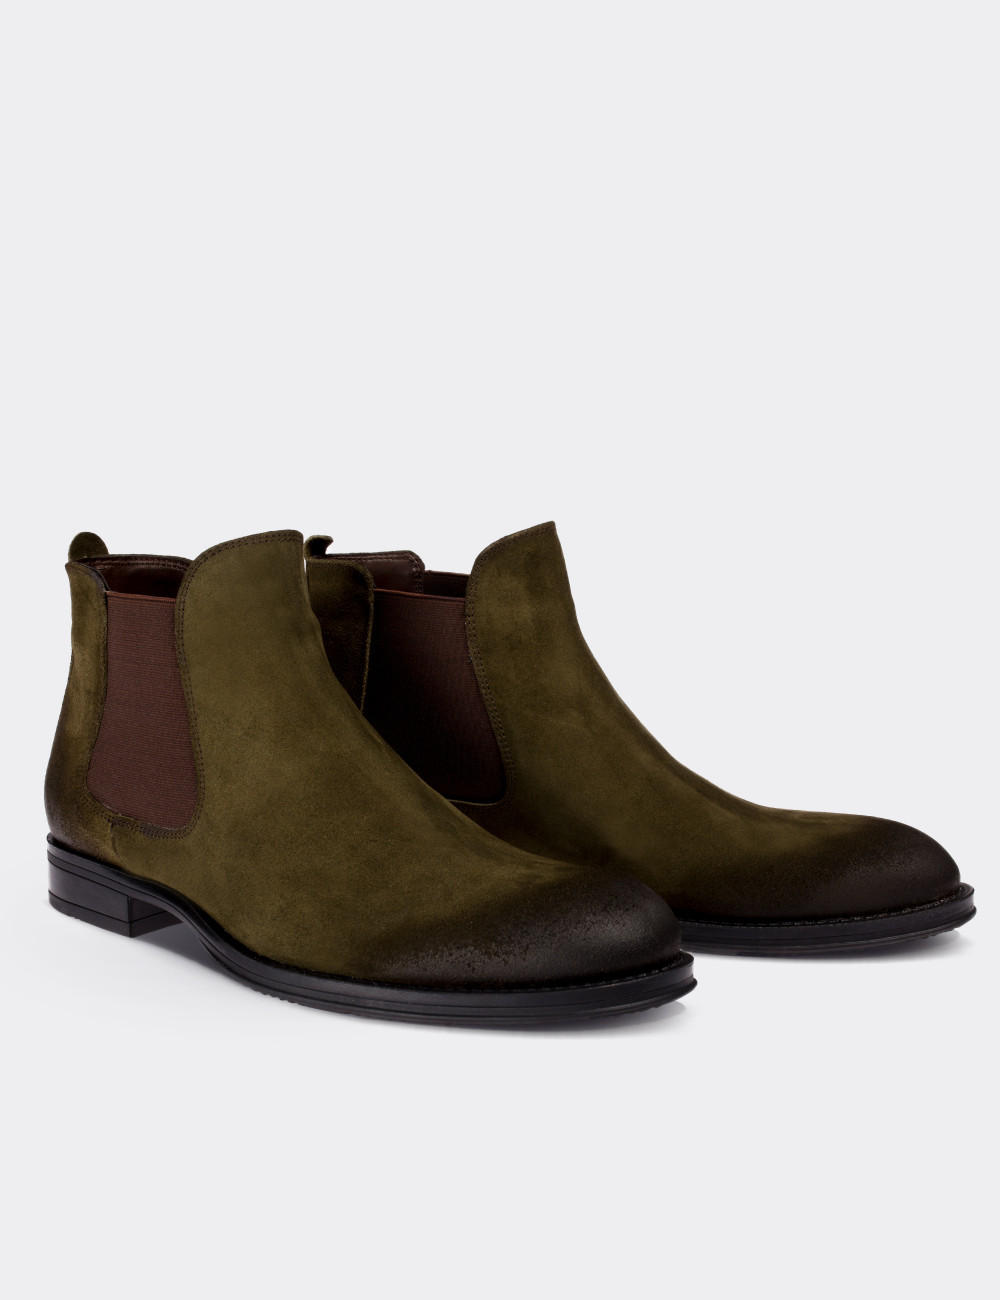 Green Suede Leather Chelsea Boots - 01620MYSLC01